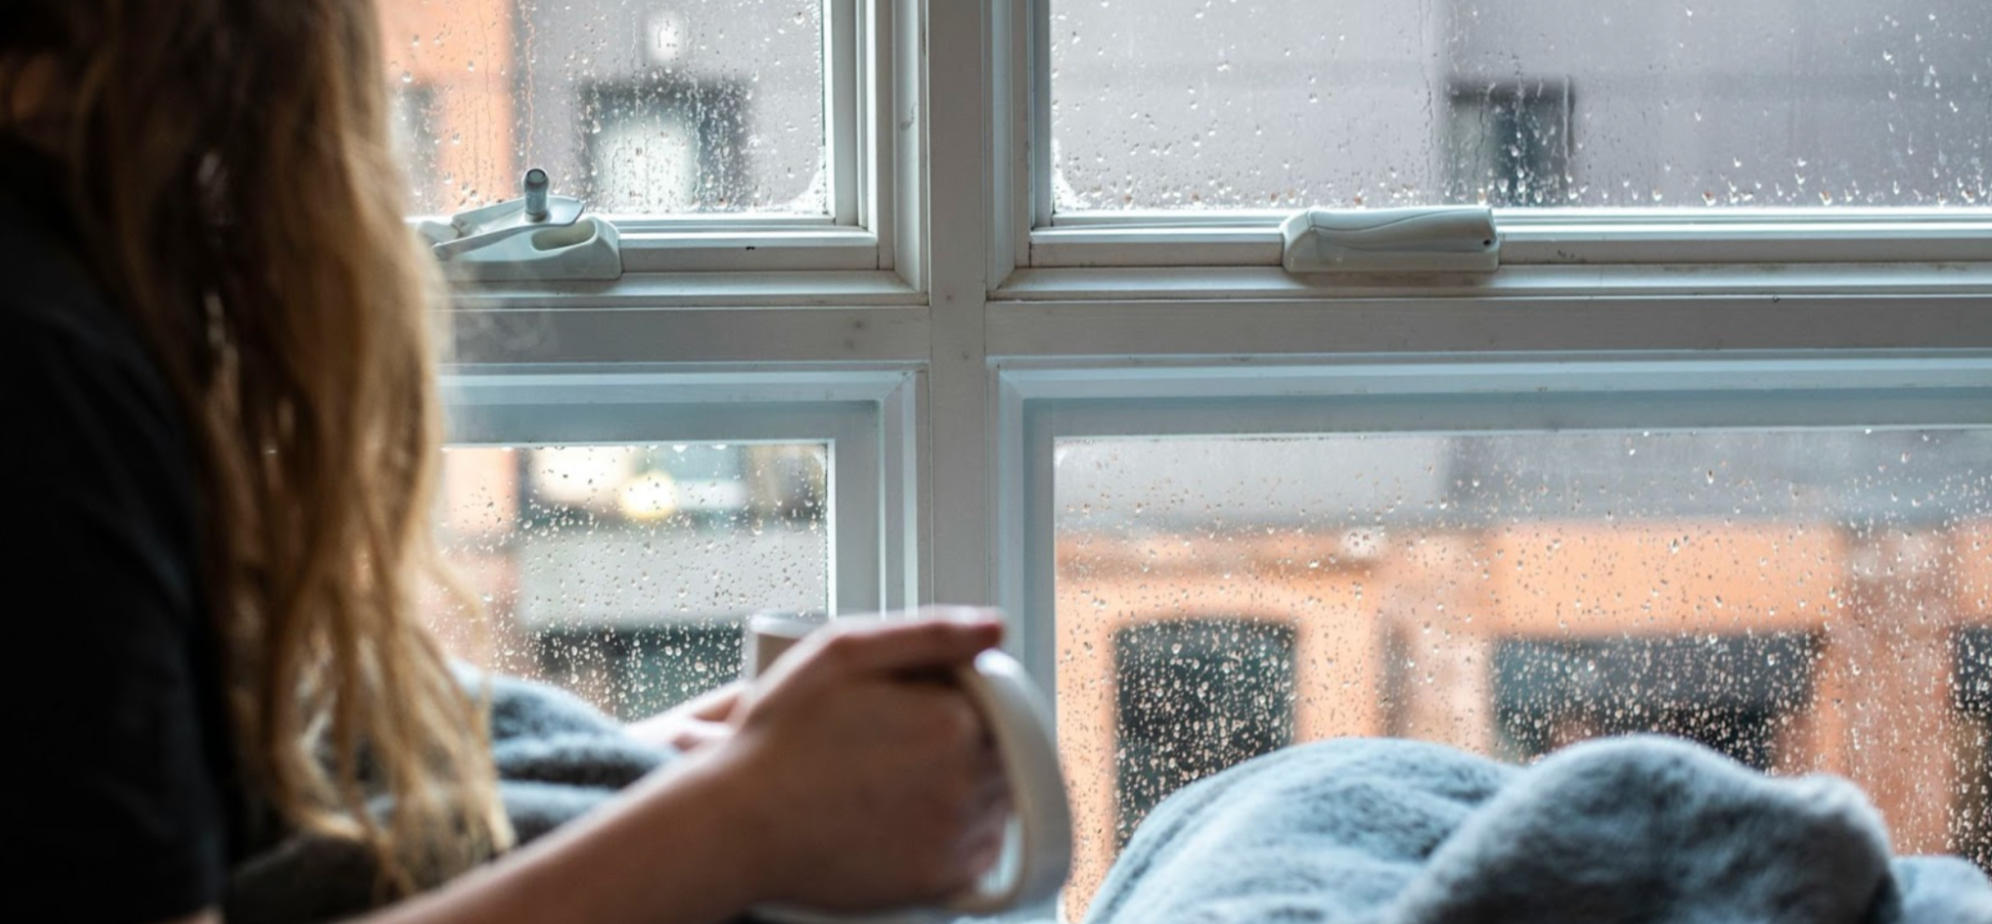 Woman sitting by raining window with a blanket and holding a mug